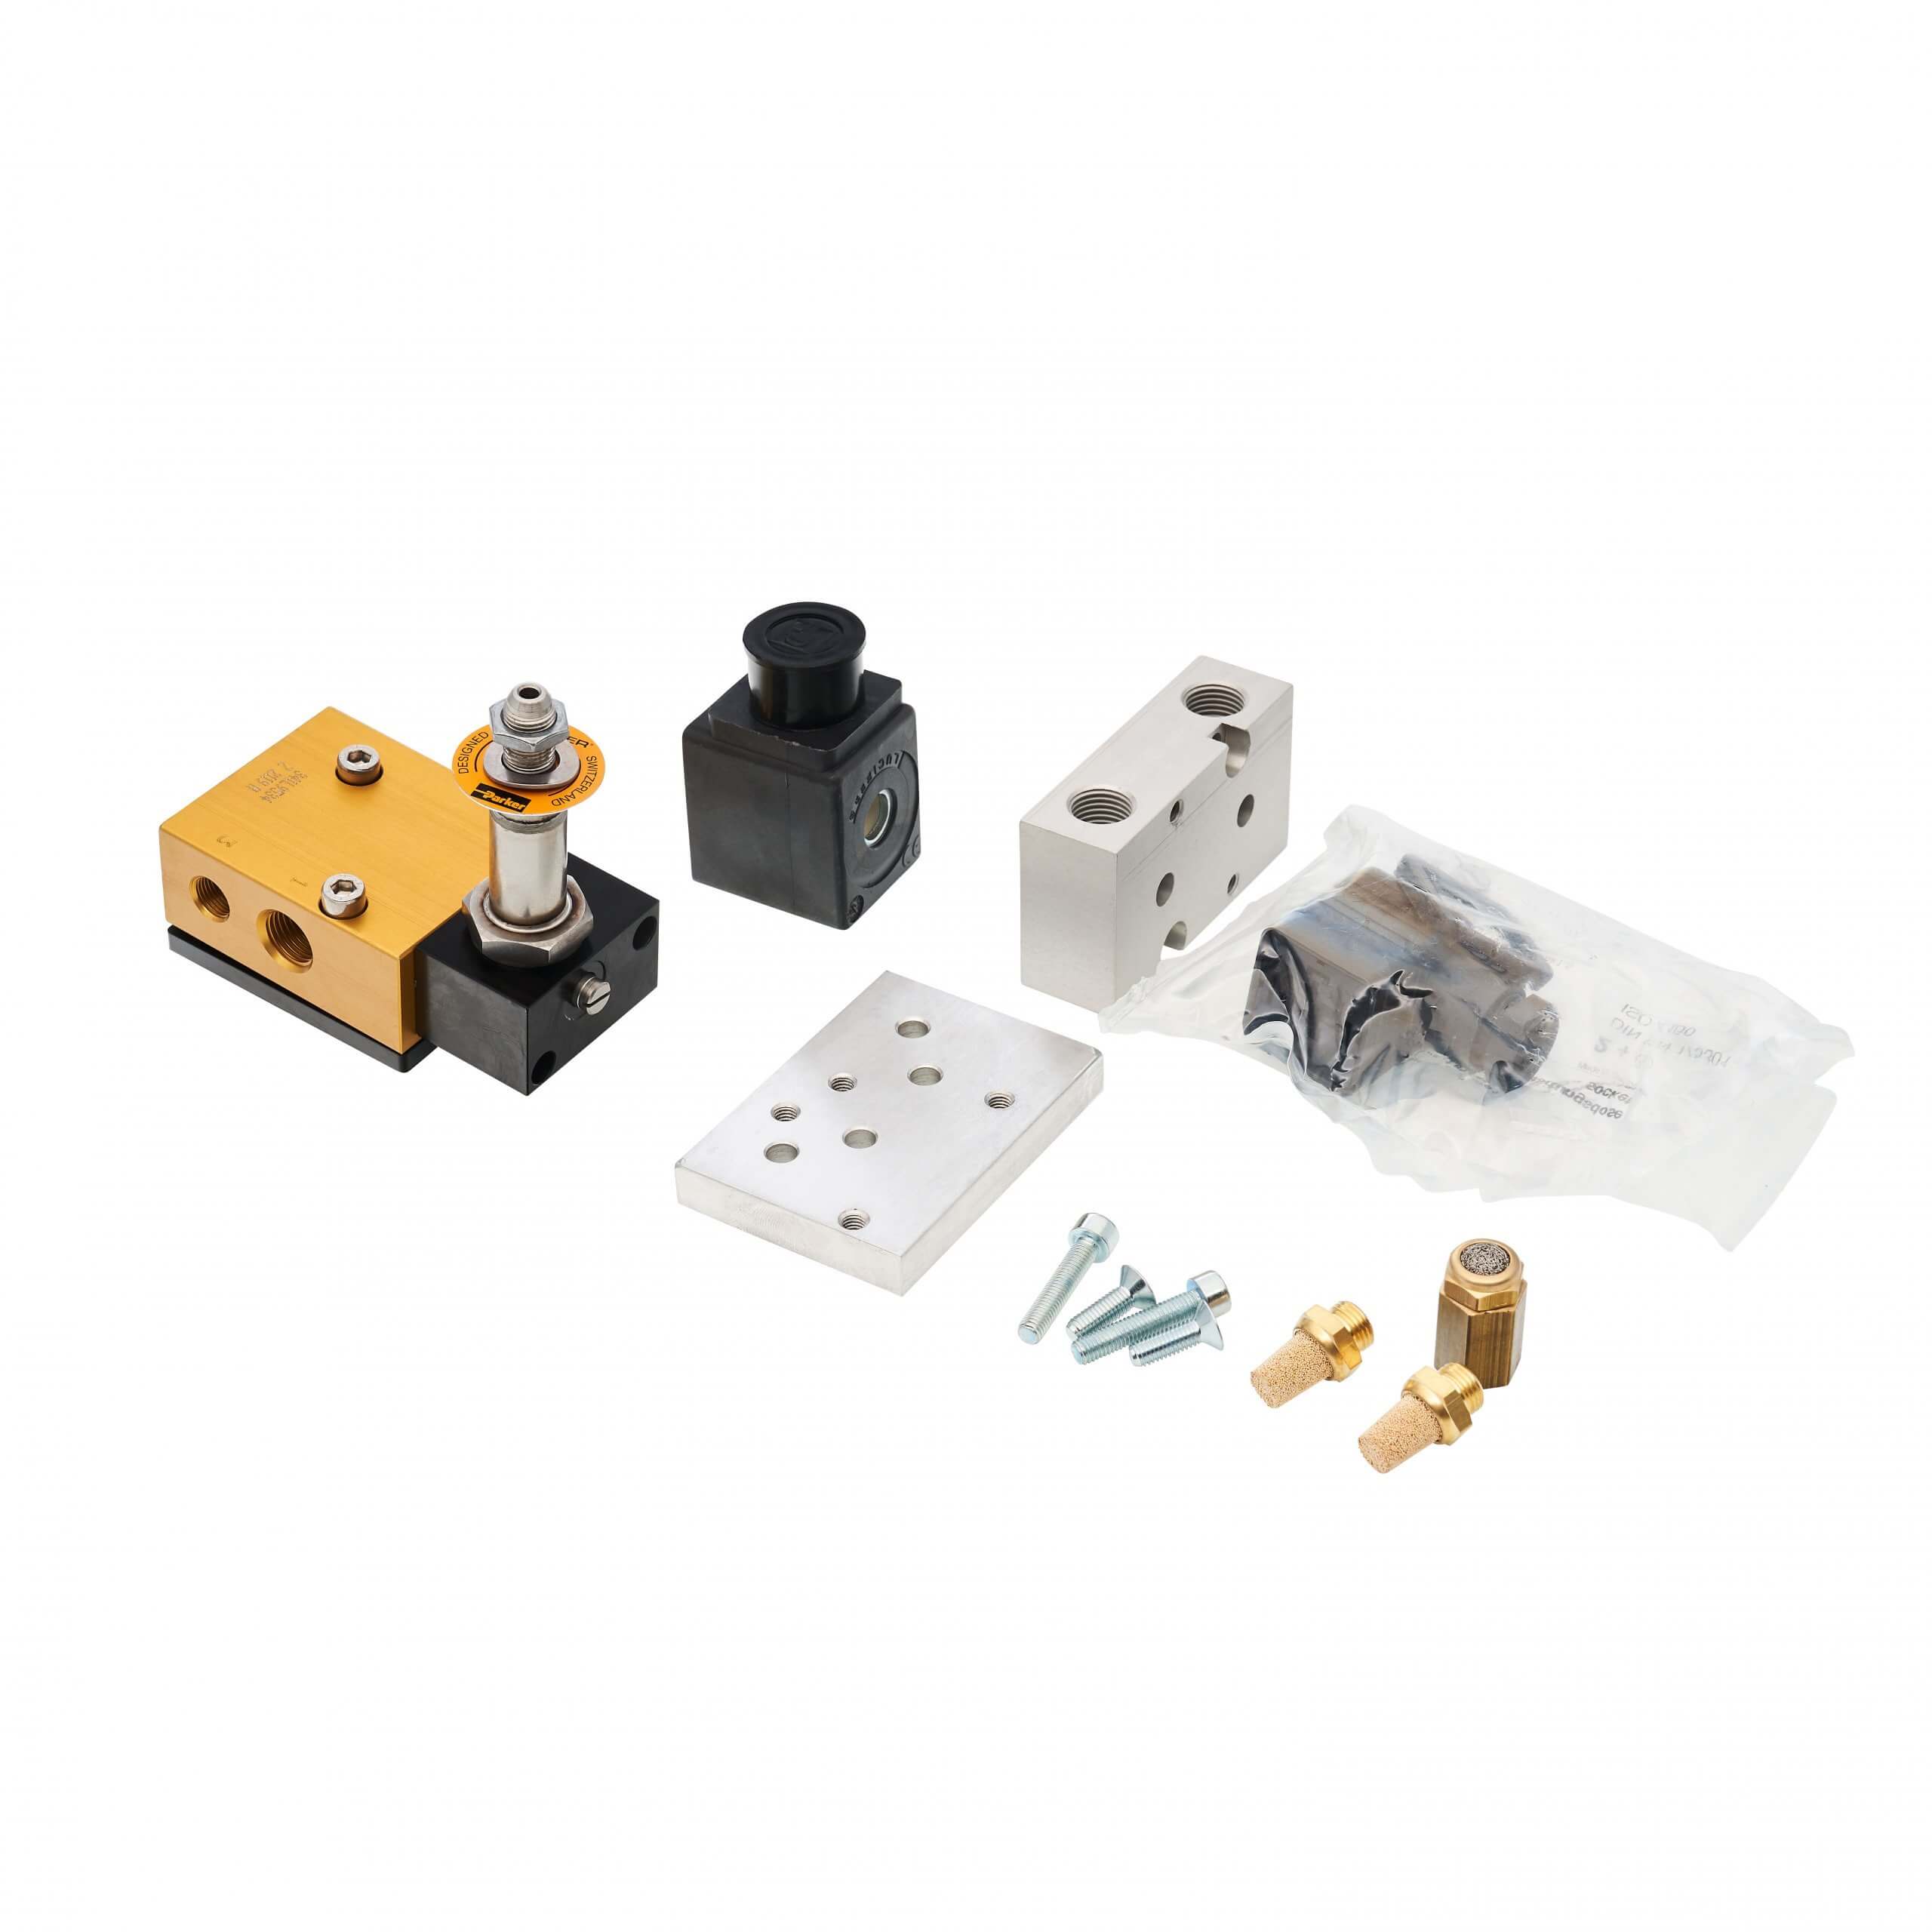 Filters - solenoid valve set for type 6.23